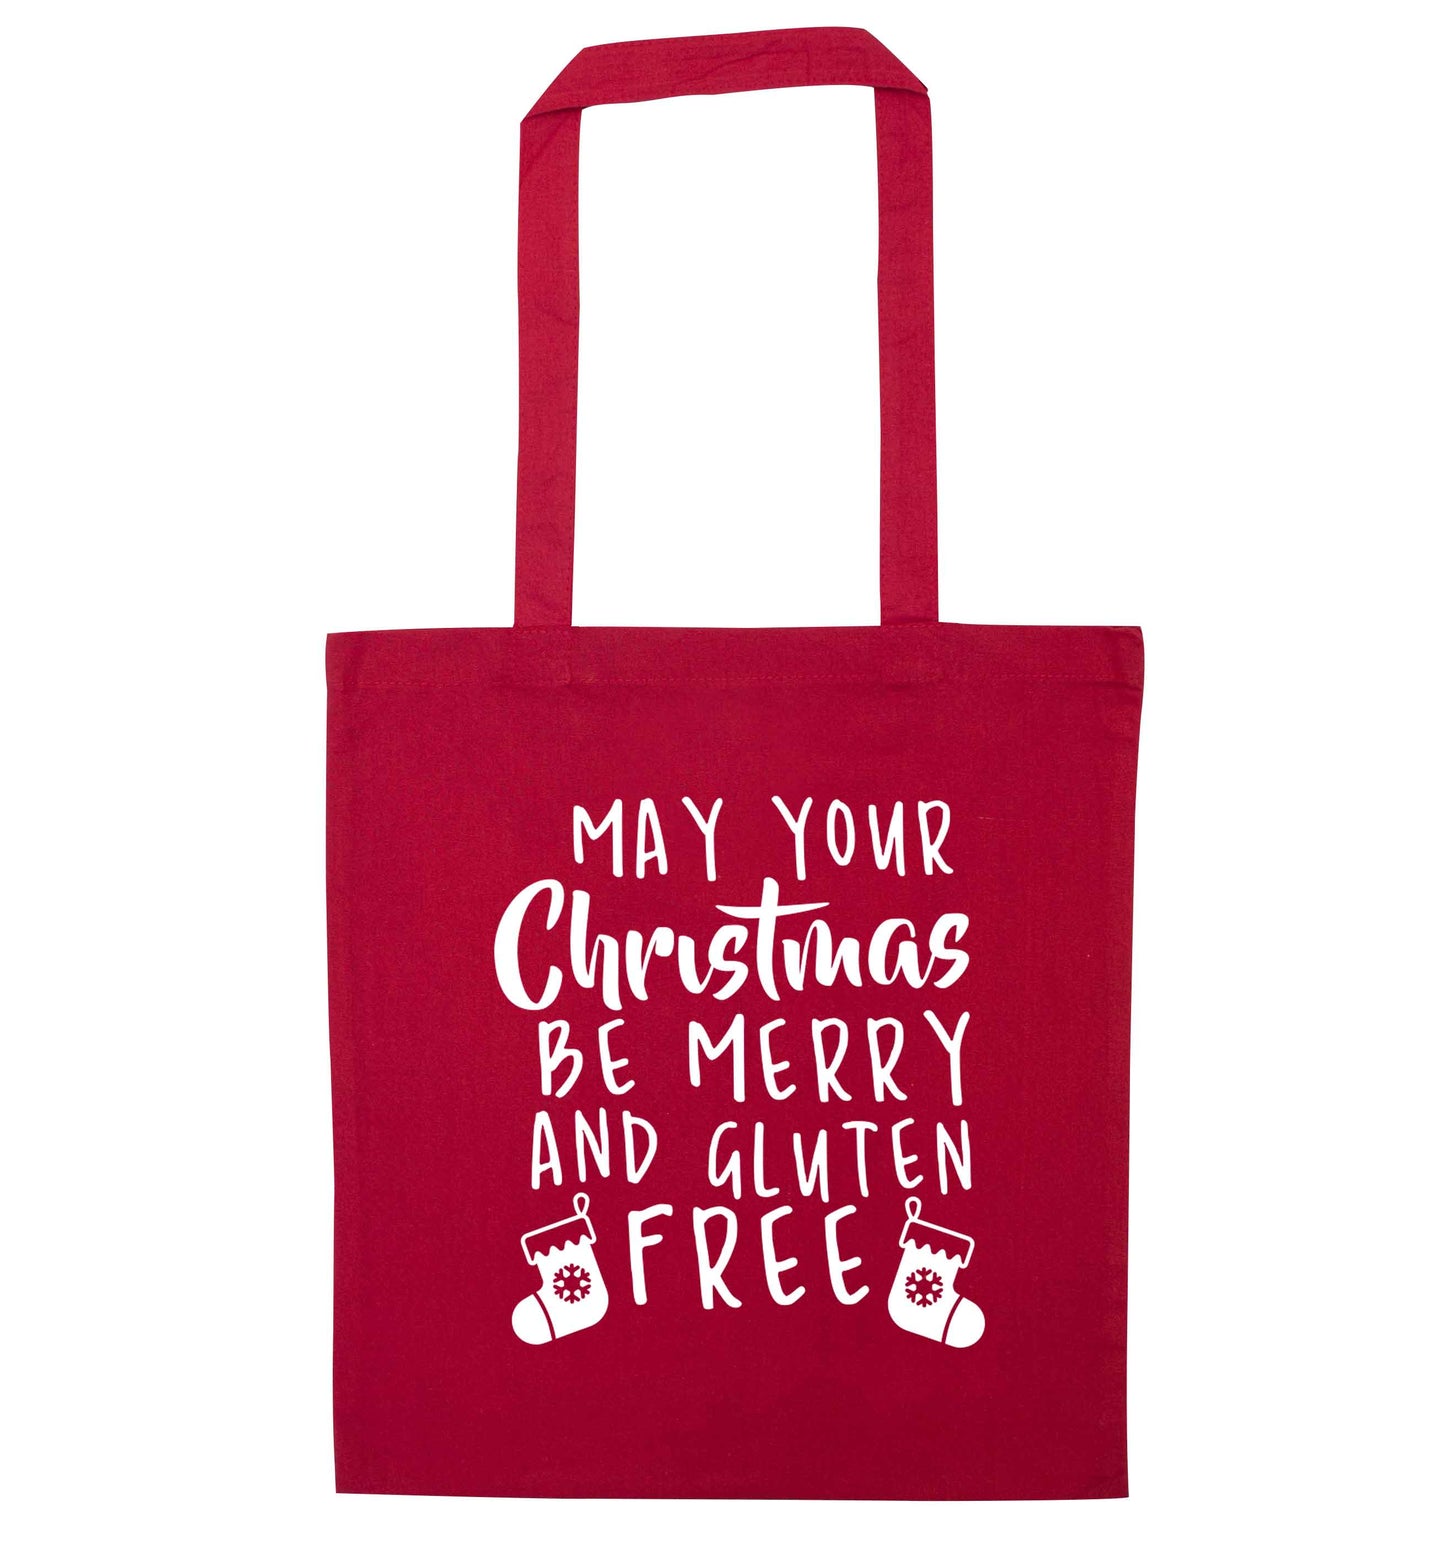 May your Christmas be merry and gluten free red tote bag